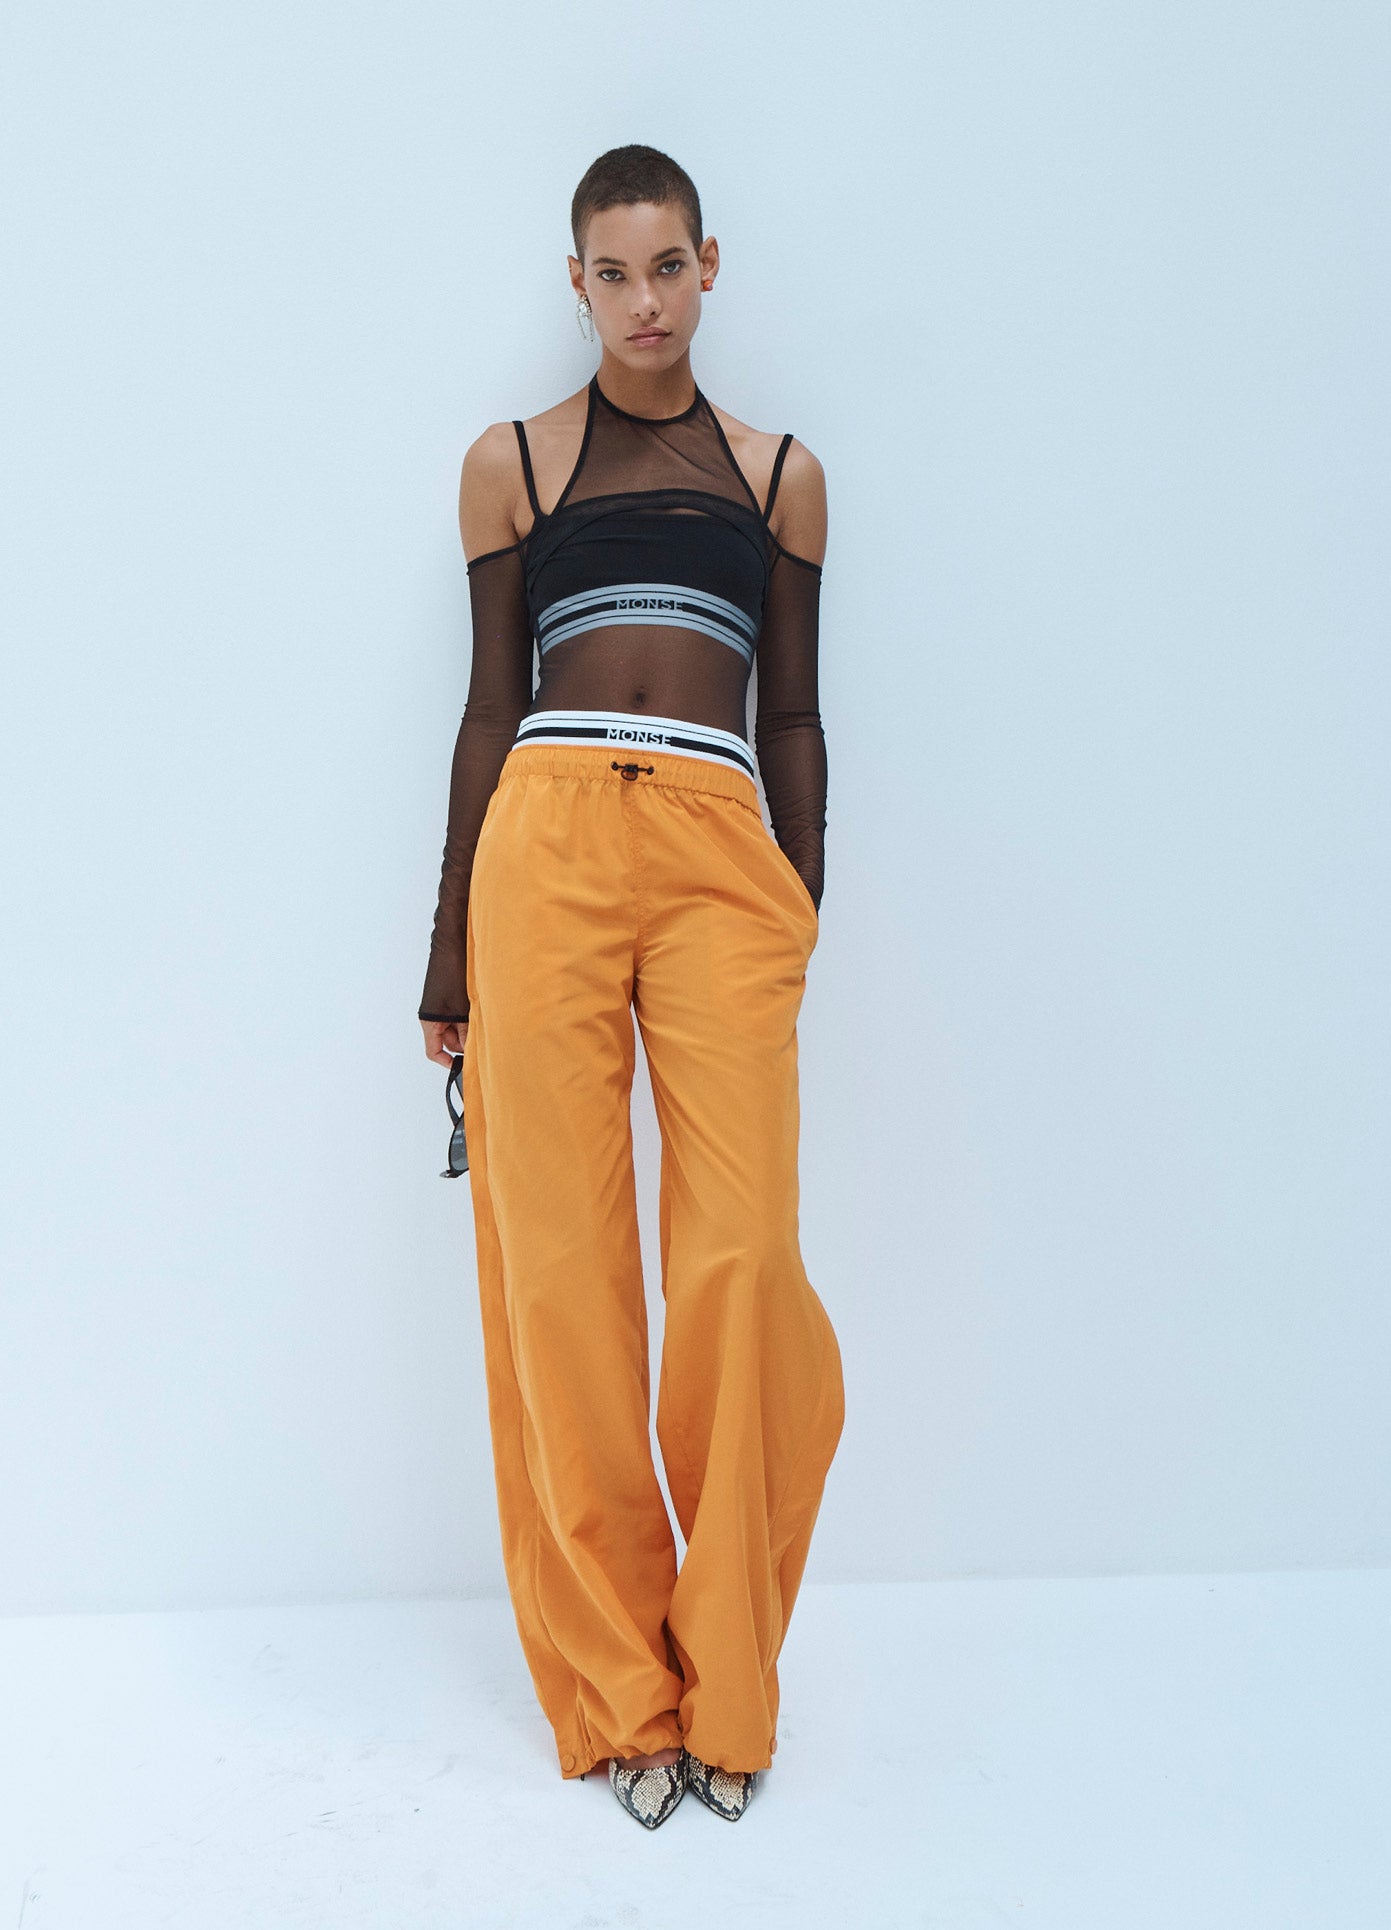 MONSE Techno Waistband Detail Parachute Pant in Orange on Model Front View